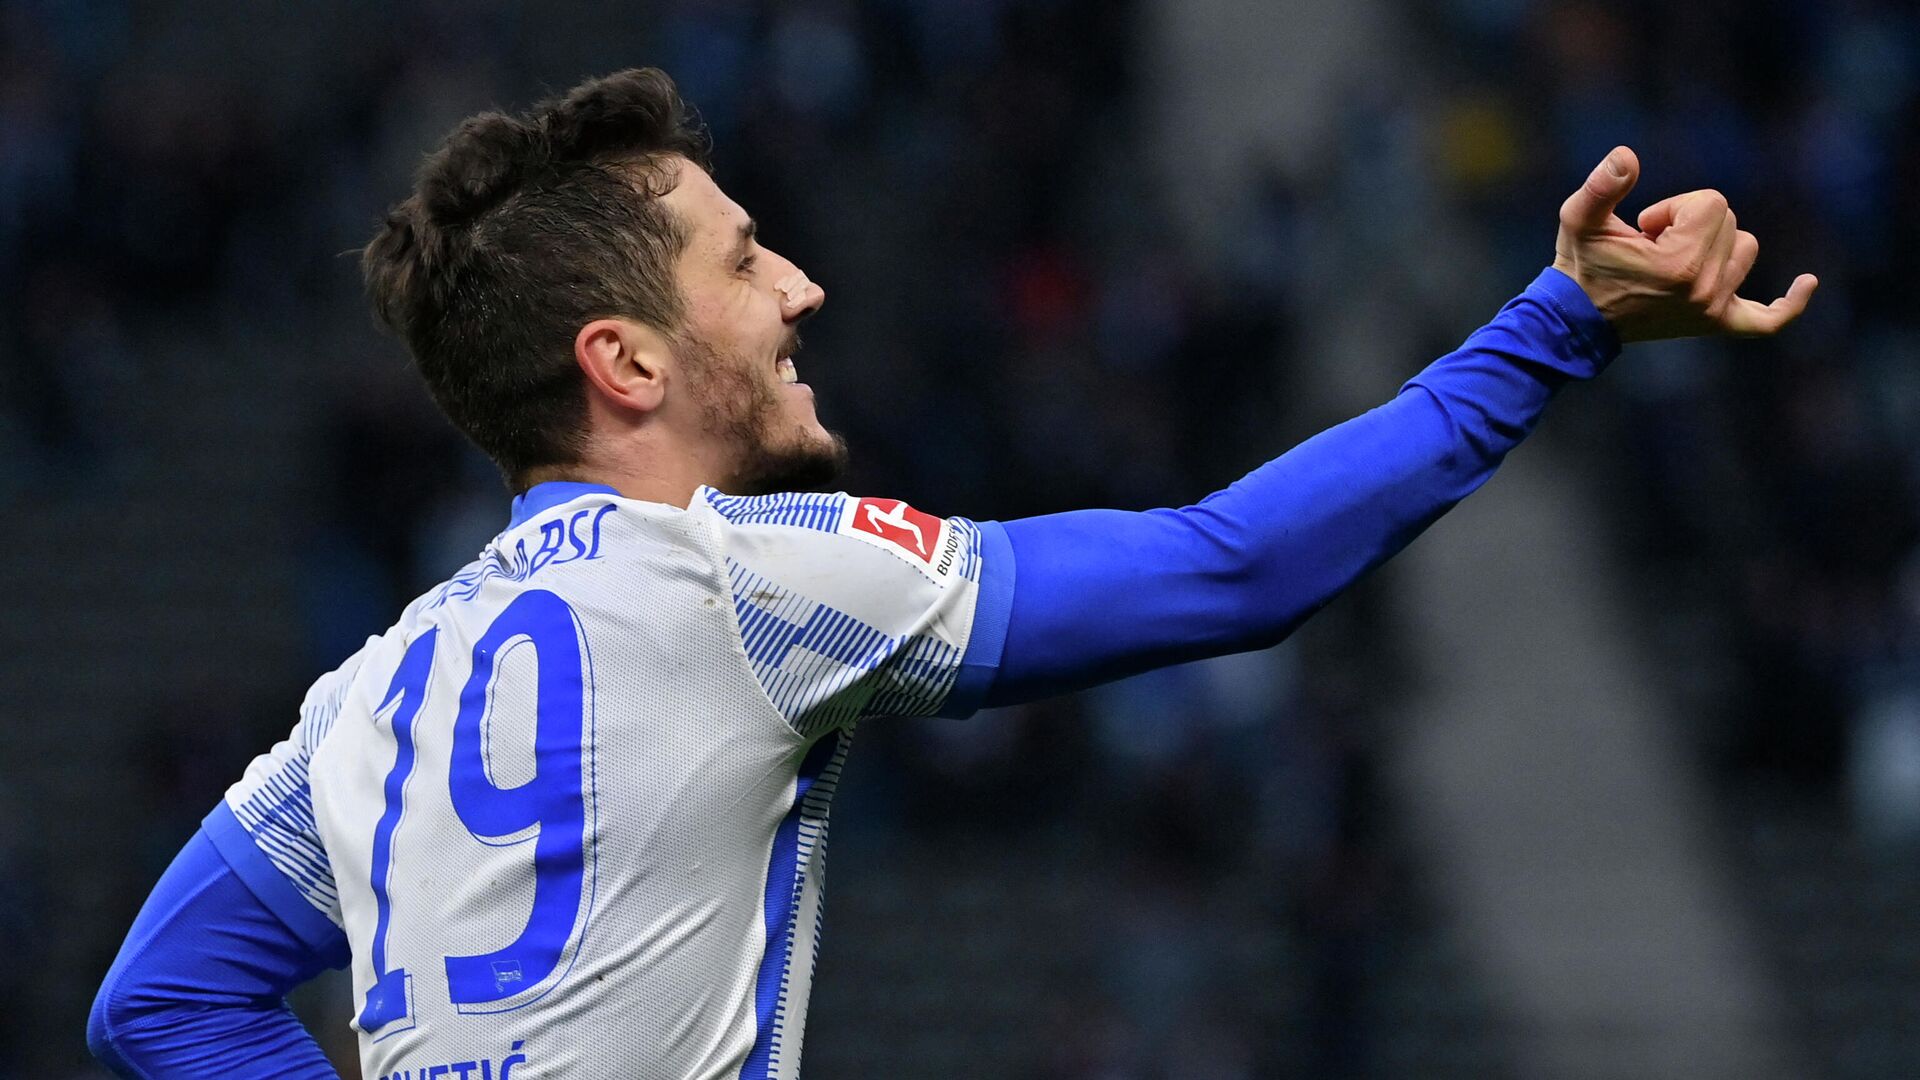 Hertha Berlin's Montenegrin forward Stevan Jovetic celebrates after scoring the 1-0 during the German first division Bundesliga football match between Hertha Berlin and Bayer Leverkusen in Berlin, Germany, on November 7, 2021. (Photo by John MACDOUGALL / AFP) / DFL REGULATIONS PROHIBIT ANY USE OF PHOTOGRAPHS AS IMAGE SEQUENCES AND/OR QUASI-VIDEO - РИА Новости, 1920, 05.12.2021